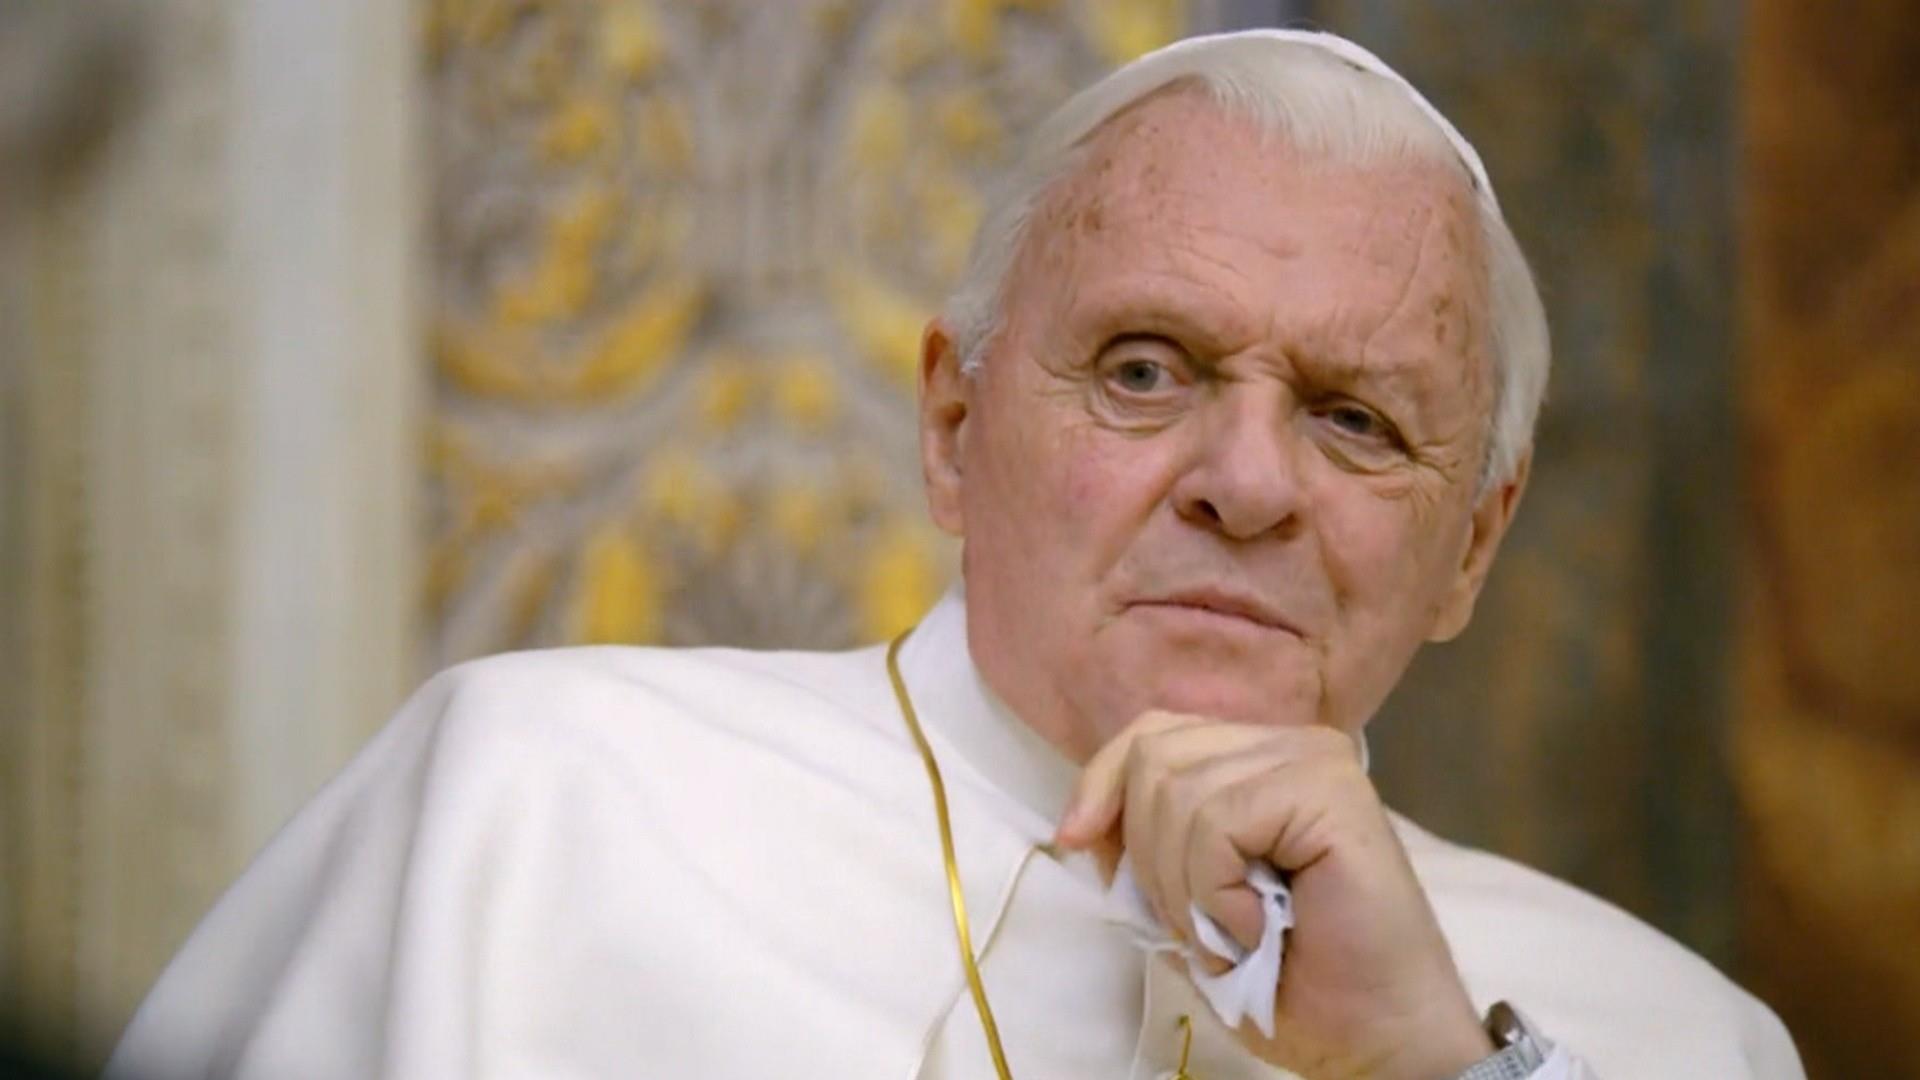 The British actor participated in the film about Benedict XVI made by Netflix.  (Netflix)